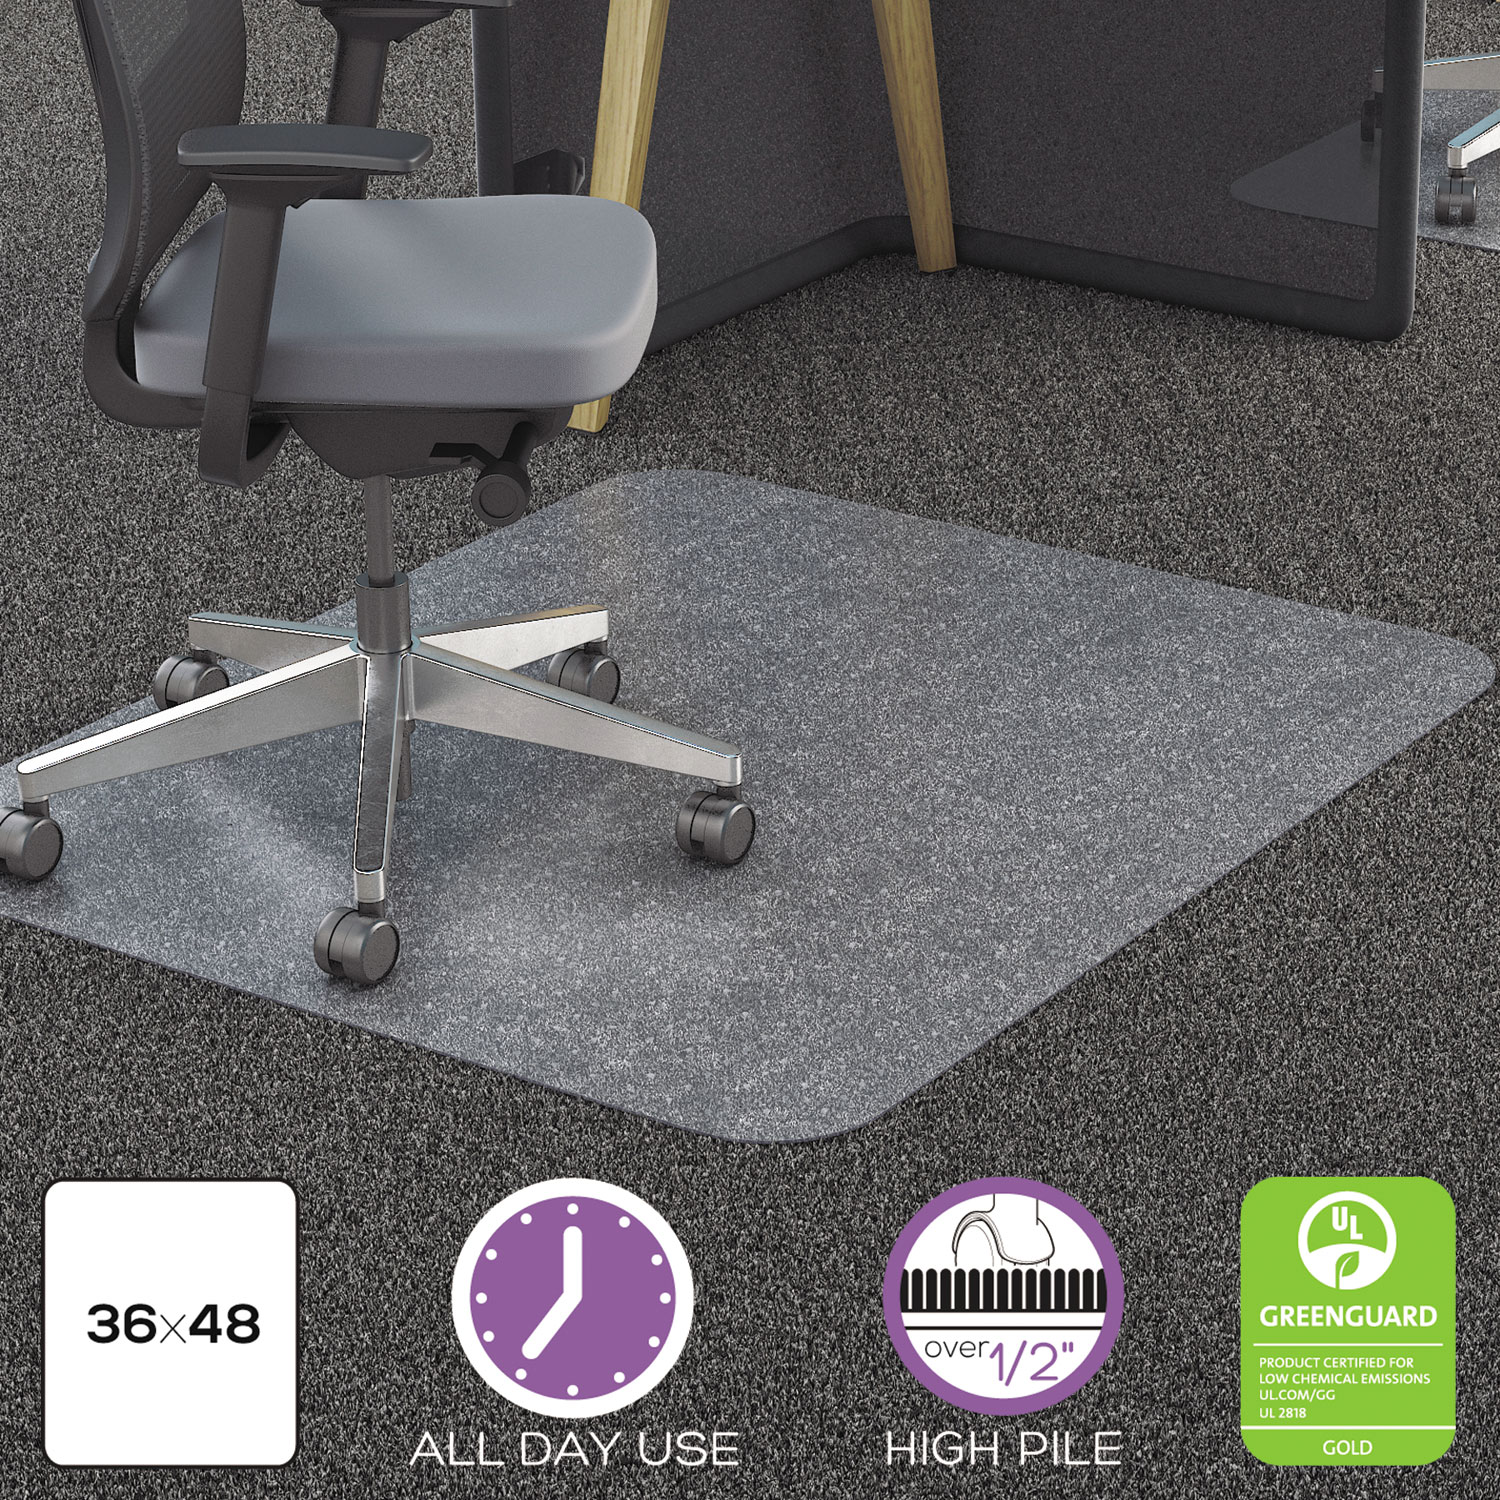  deflecto CM11142PC Polycarbonate All Day Use Chair Mat - All Carpet Types, 36 x 48, Rectangular, Clear (DEFCM11142PC) 